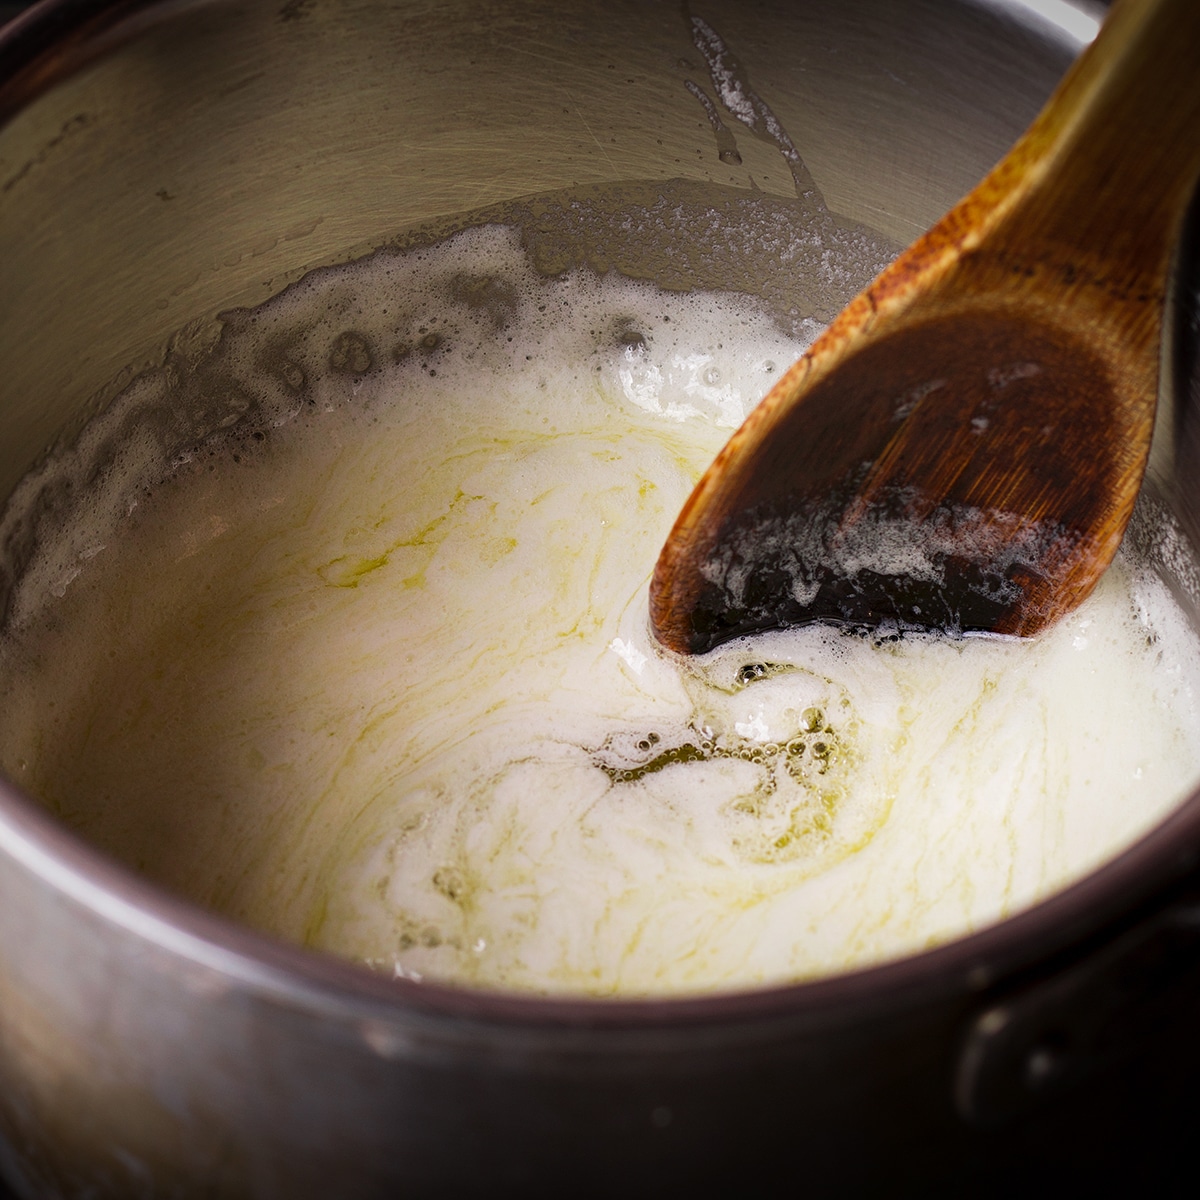 Someone using a wood spoon to stir melted butter in a saucepan. The butter is foamy and just beginning to boil.